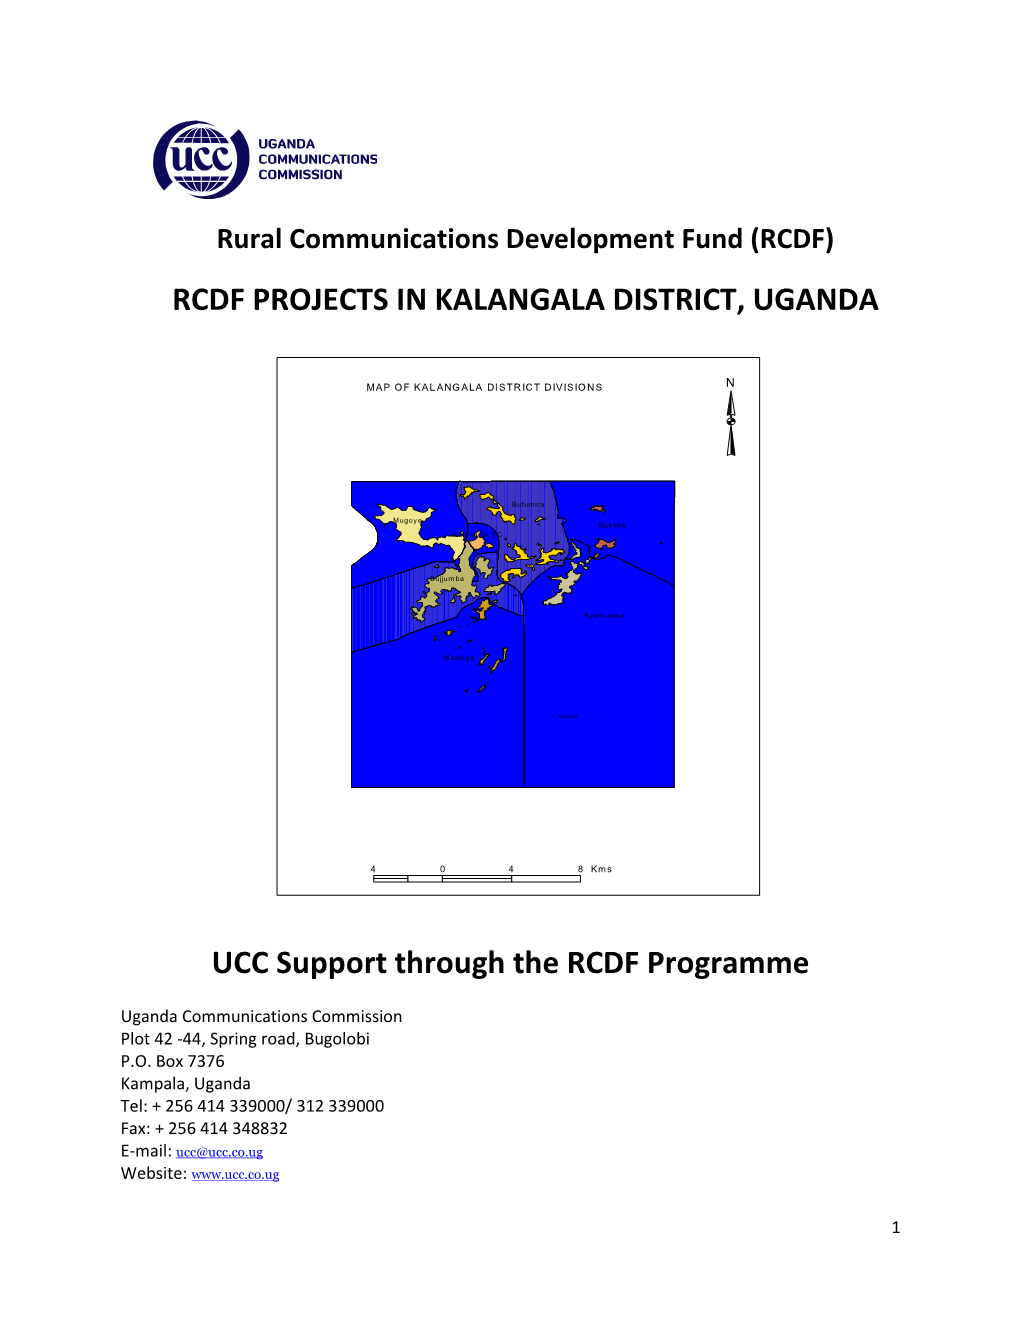 RCDF PROJECTS in KALANGALA DISTRICT, UGANDA UCC Support